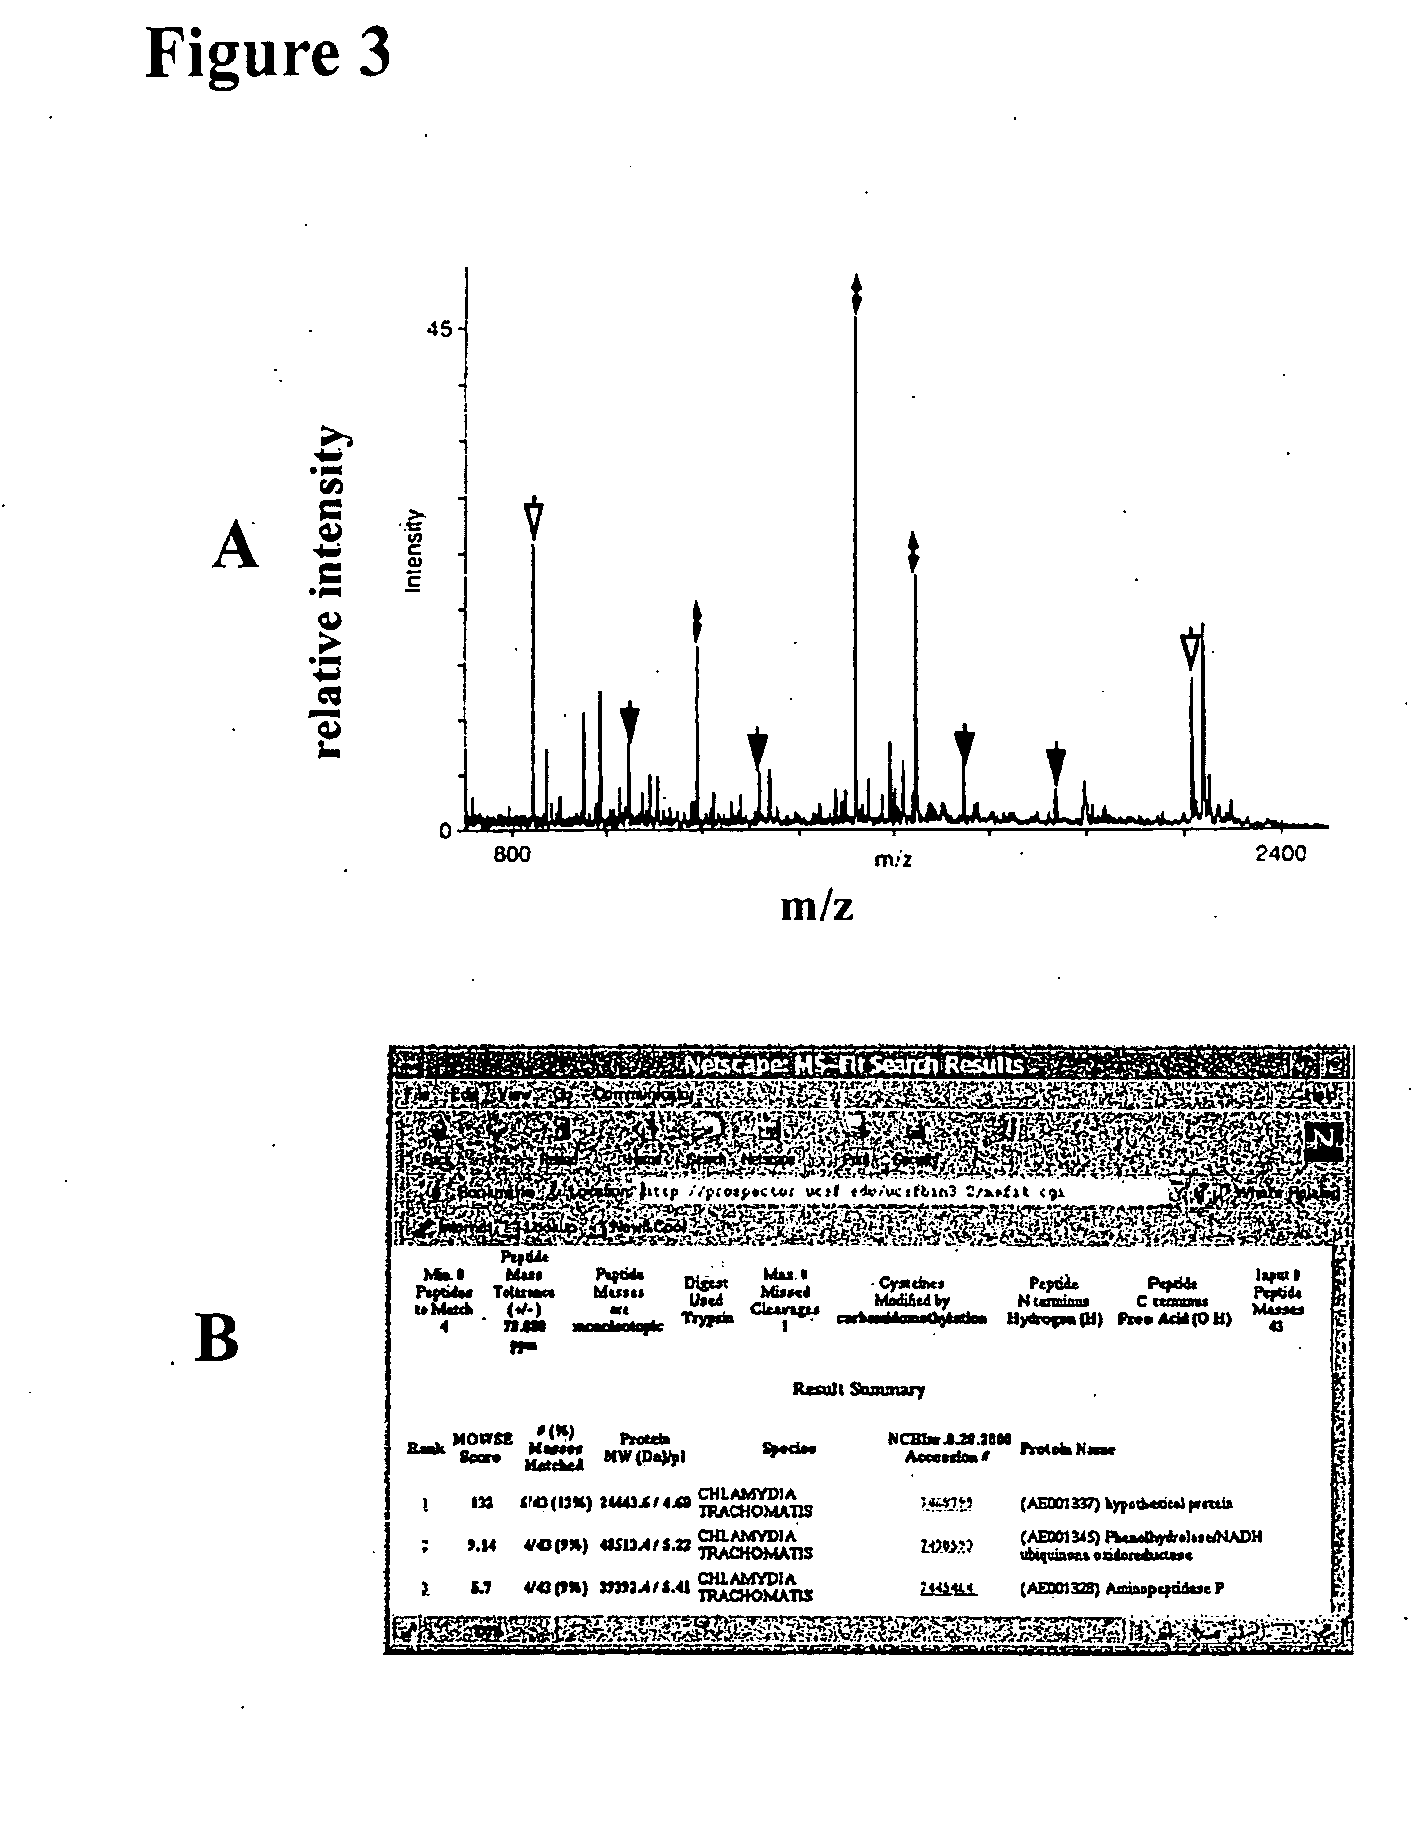 Method for identification of proteins from intracellular bacteria